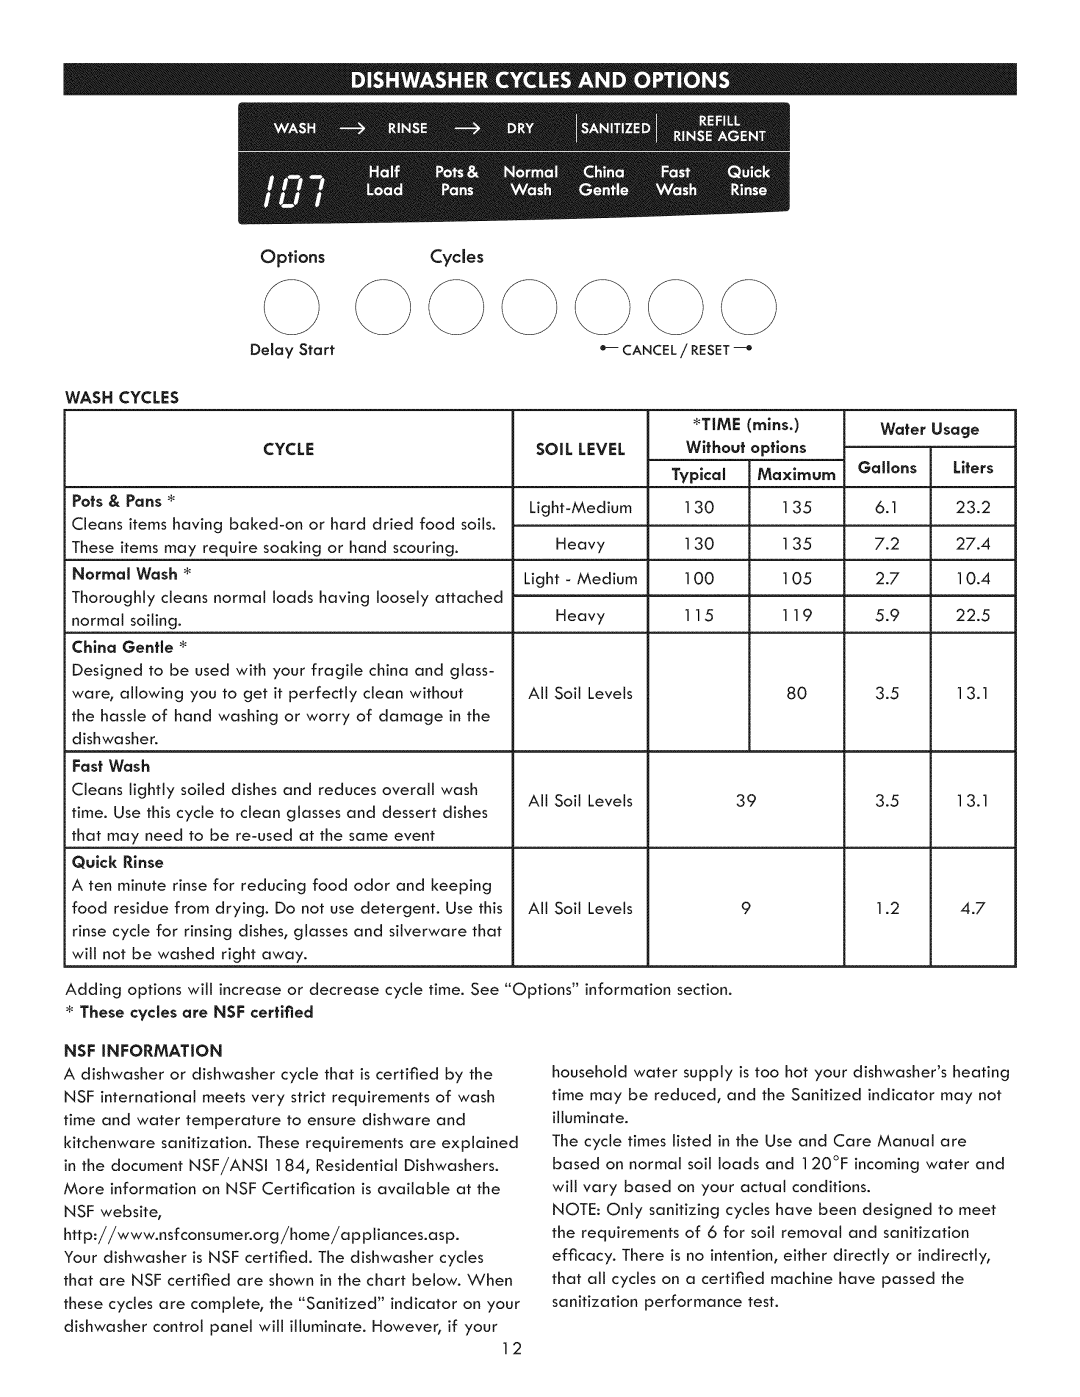 Kenmore 630.7793 manual Options Cycles, SOiL LEVEL 